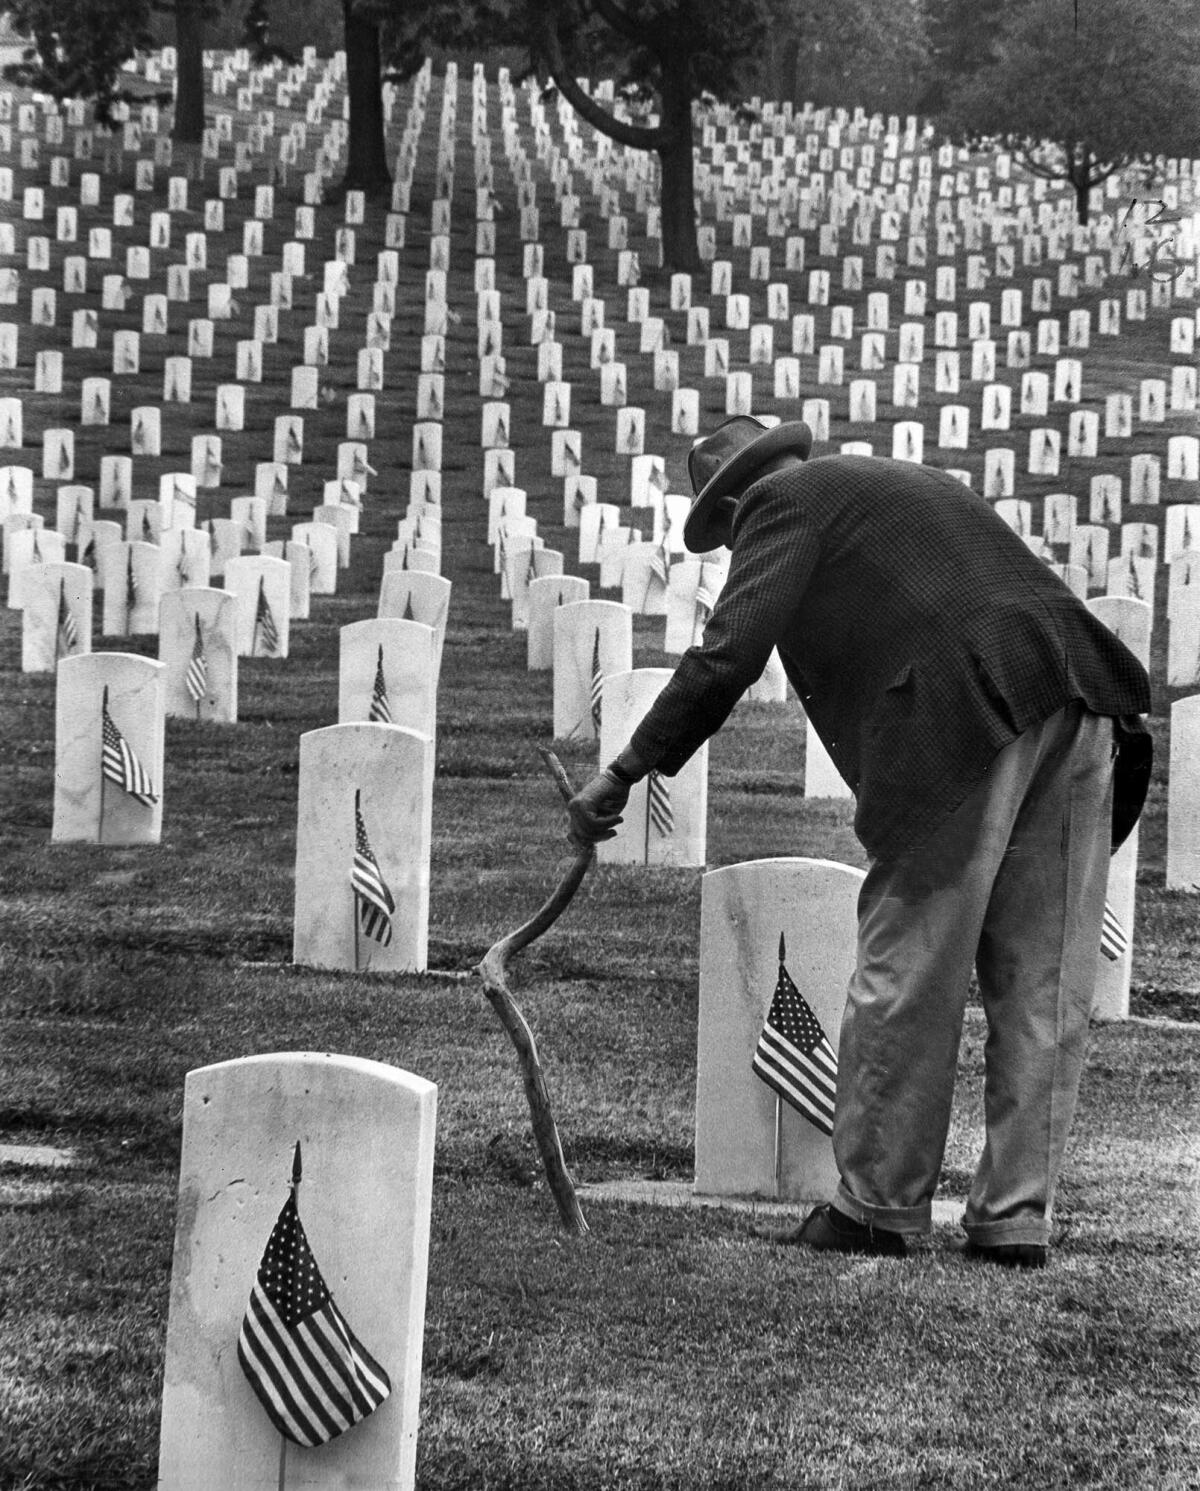 May 29, 1967: Veteran Charles Billstron, 47, leans on his walking stick as he examines headstone at Sawtelle Veterans Cemetery. Billstrom, a former Air Force sergeant, came look for the grave of a friend.